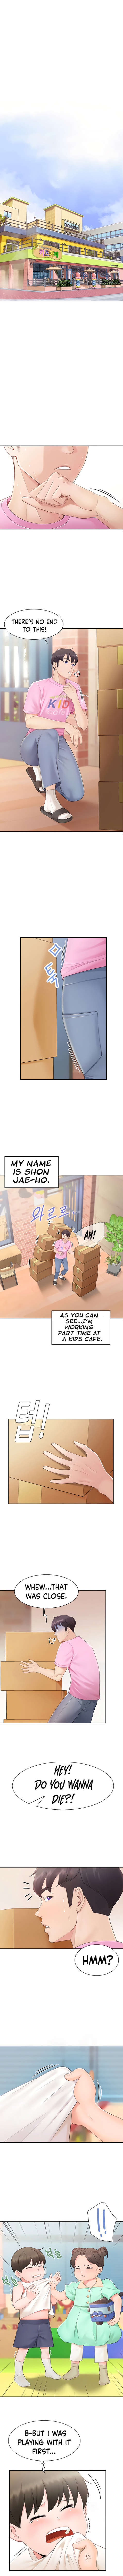 Welcome to Kids Cafe - Chapter 1 Page 2